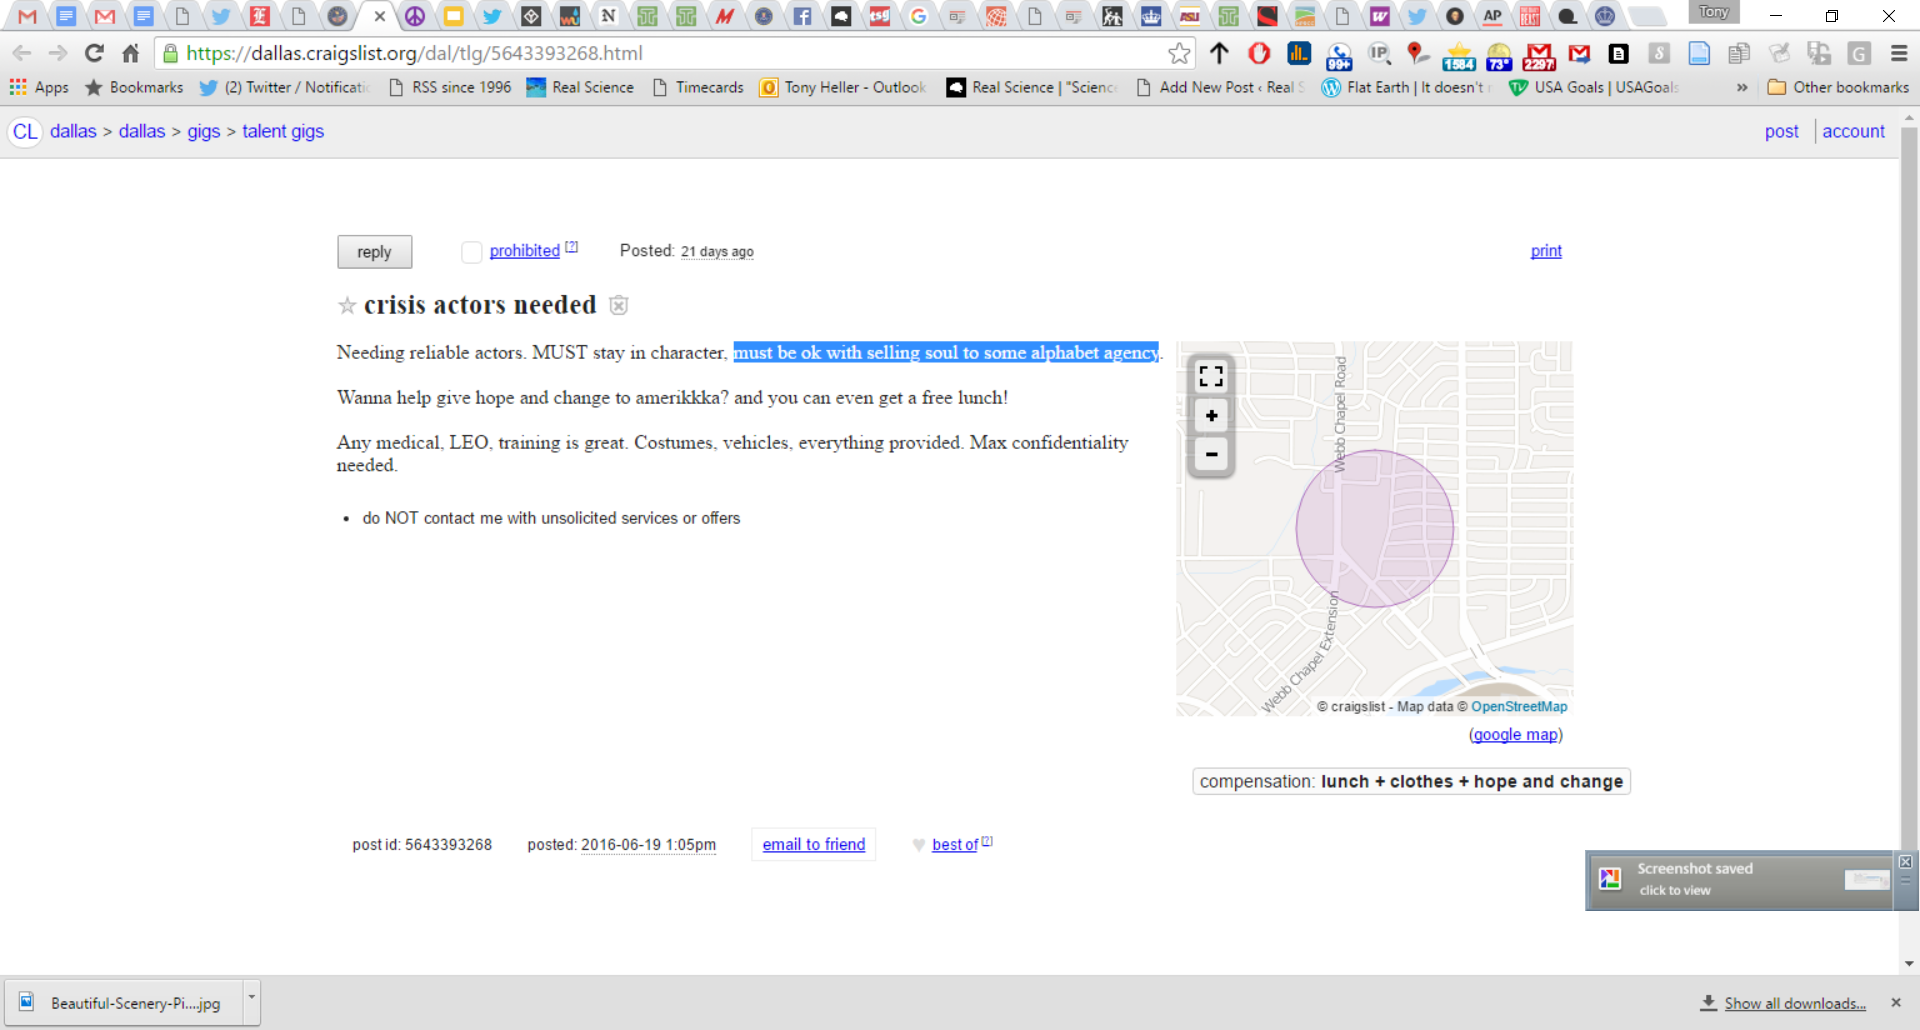 On Dallas Craigslist | Real Climate Science